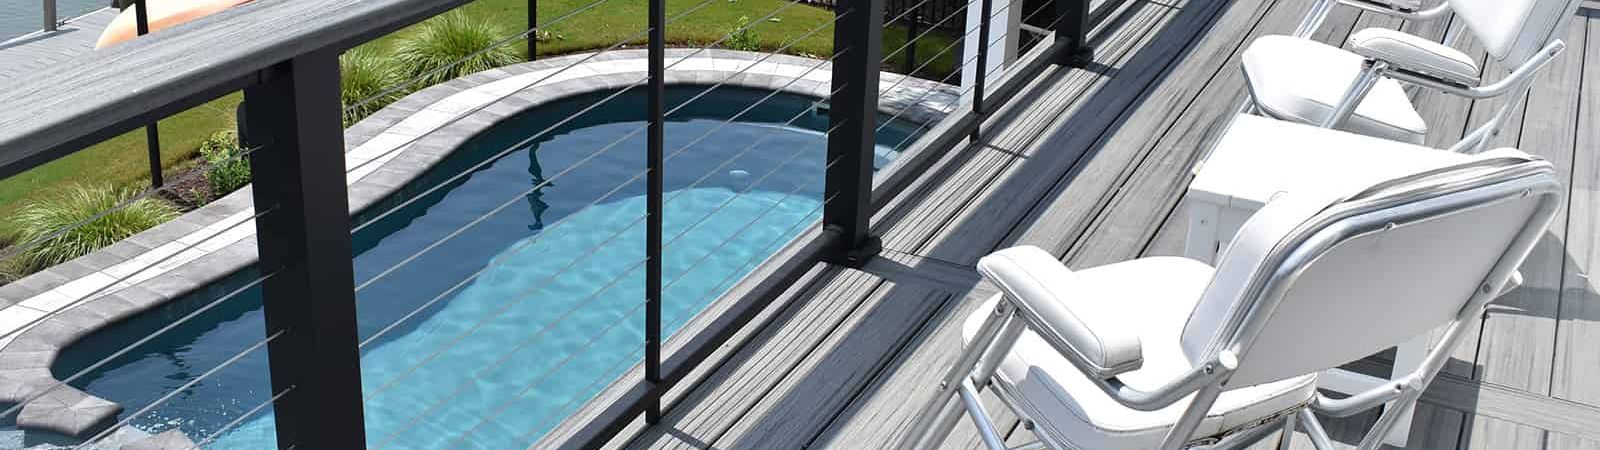 Long Pool with Deck